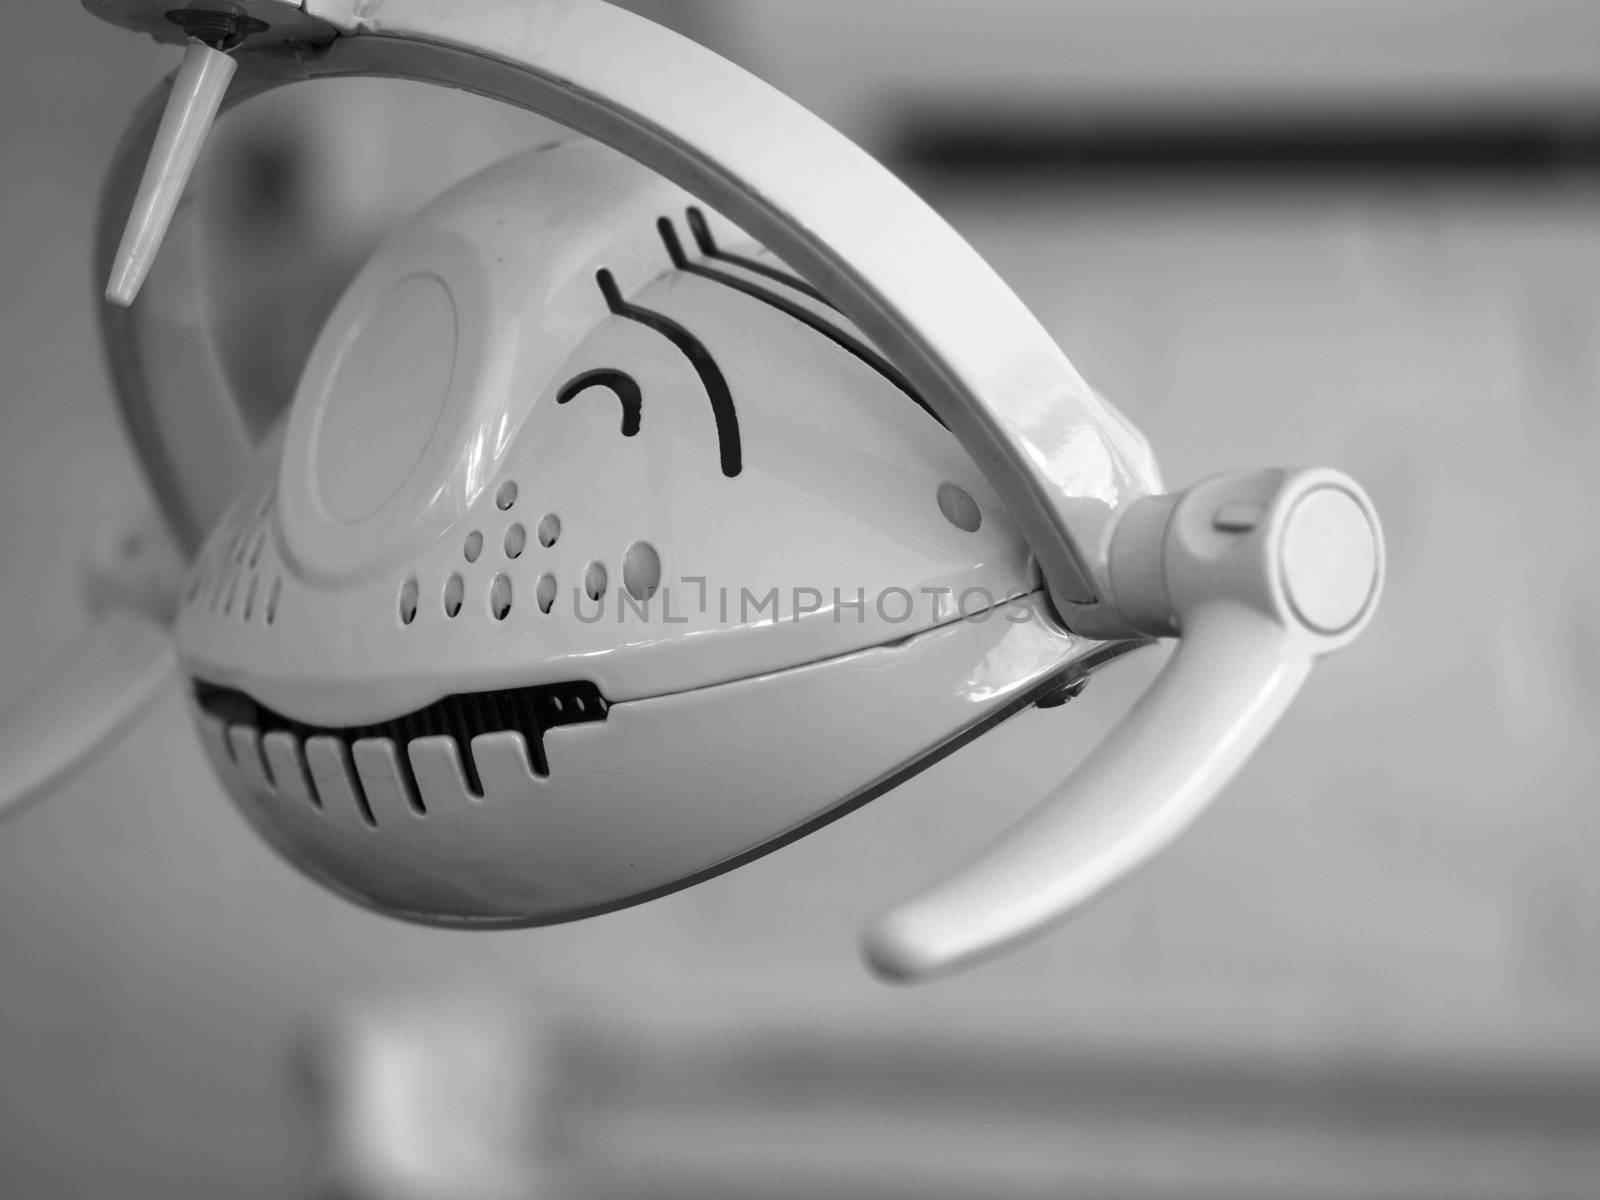 BLACK AND WHITE PHOTO OF BACK SIDE OF DENTAL SURGICAL LIGHT